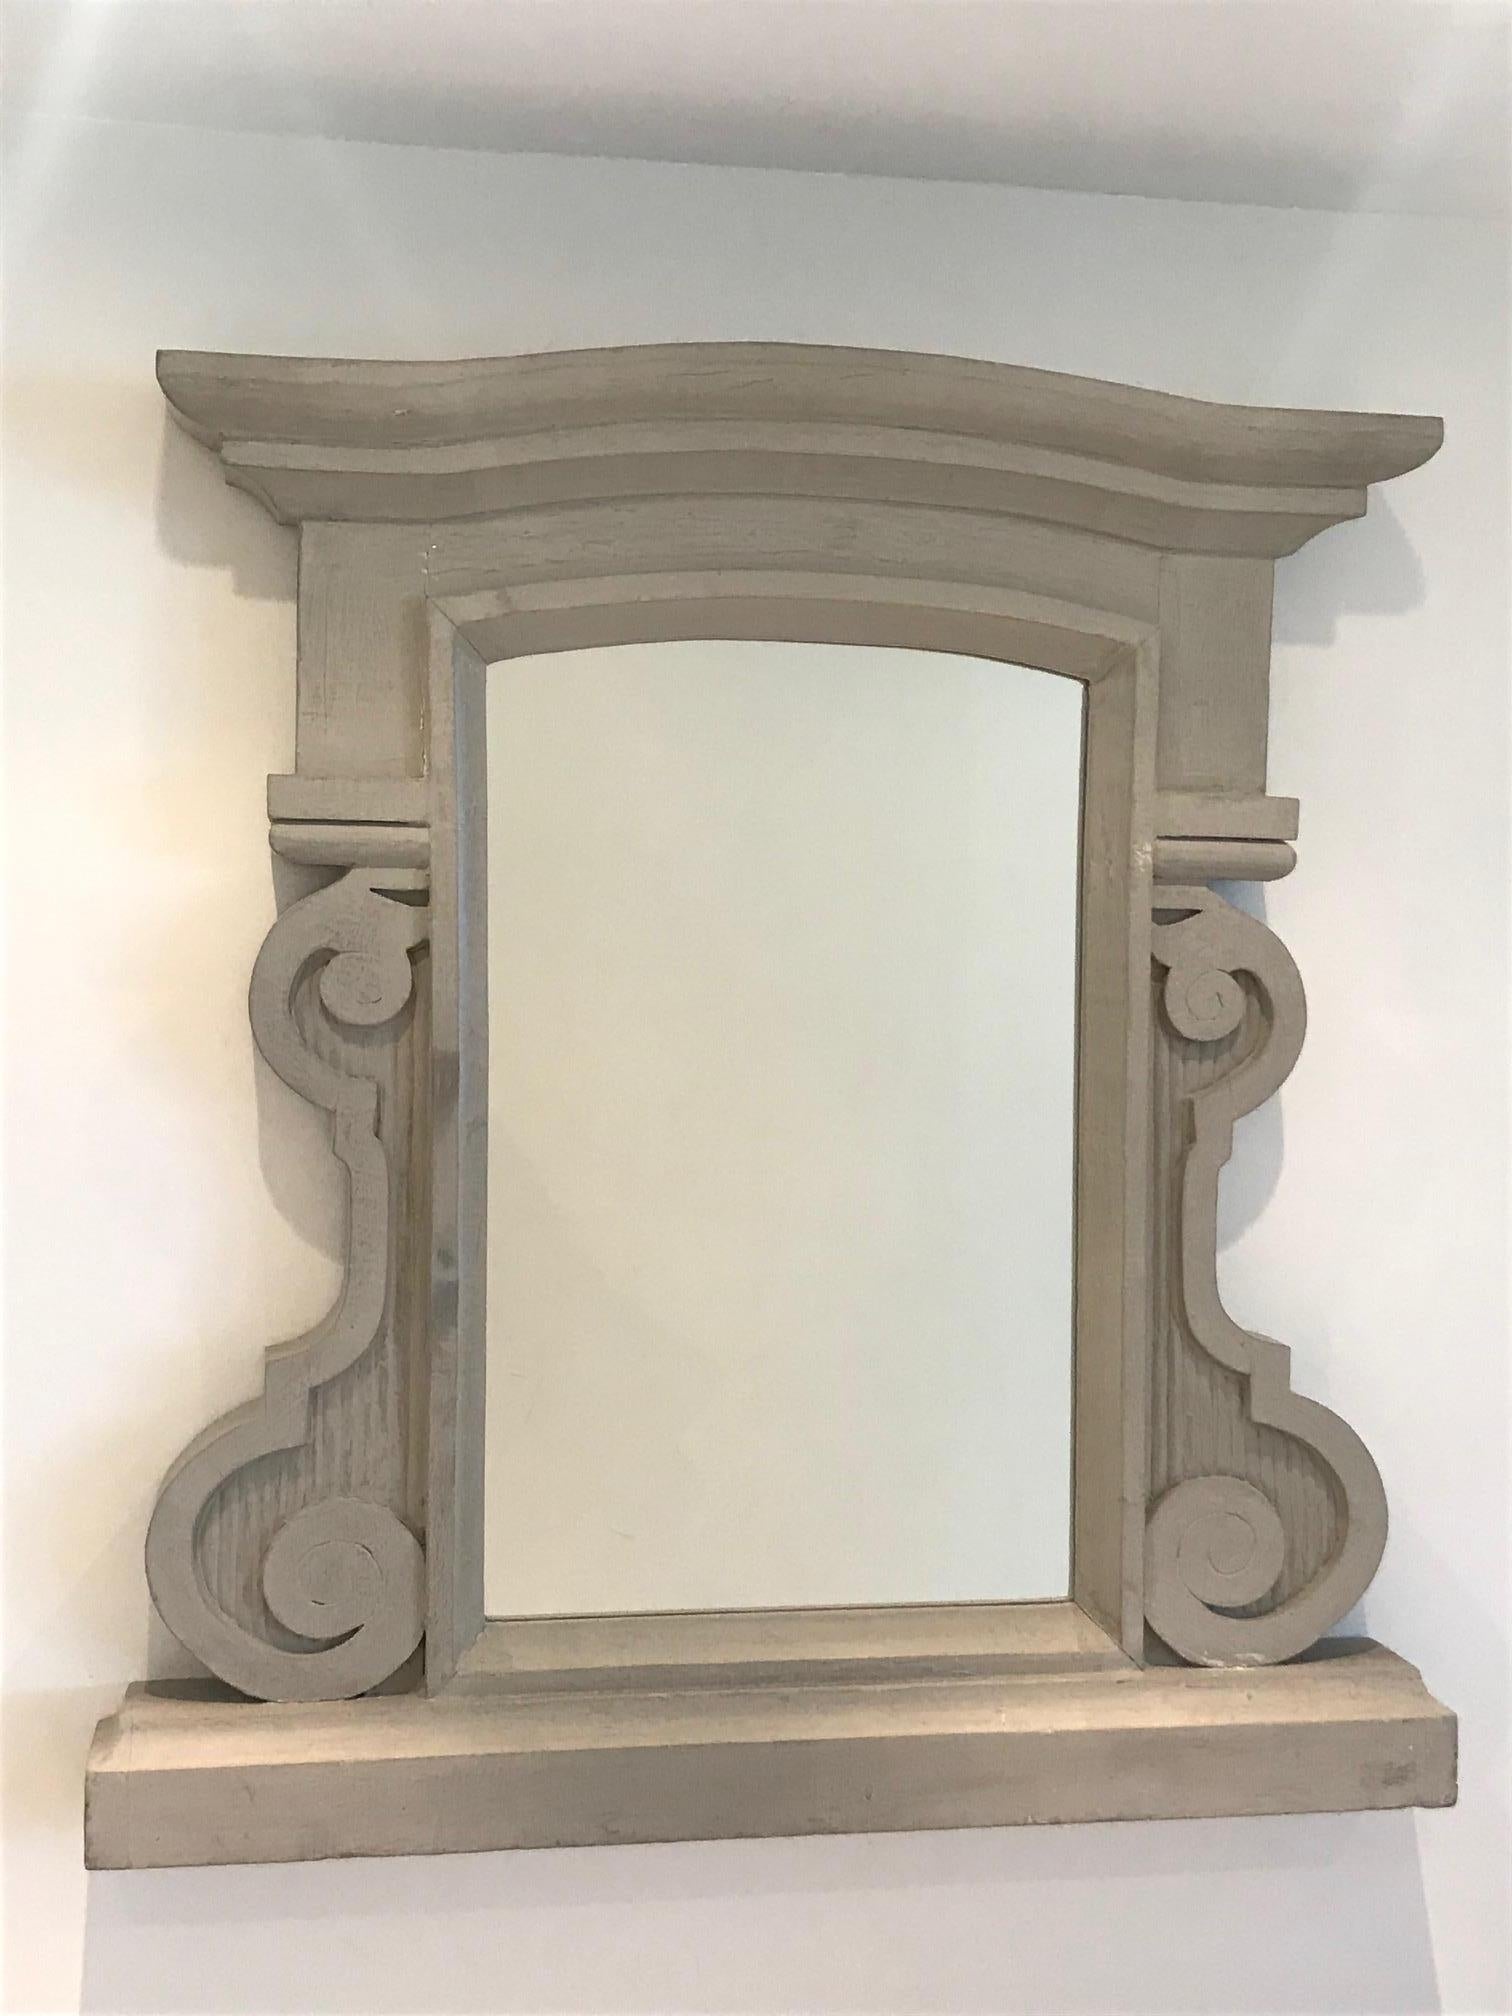 Vintage French mirror comprised of solid and heavyweight reclaimed wood. Mirror features a gorgeous hand carved frame with large chiseled scrolls and fluted details. Has curved pediment top and thick stepped shelf base. Painted in grey / beige by